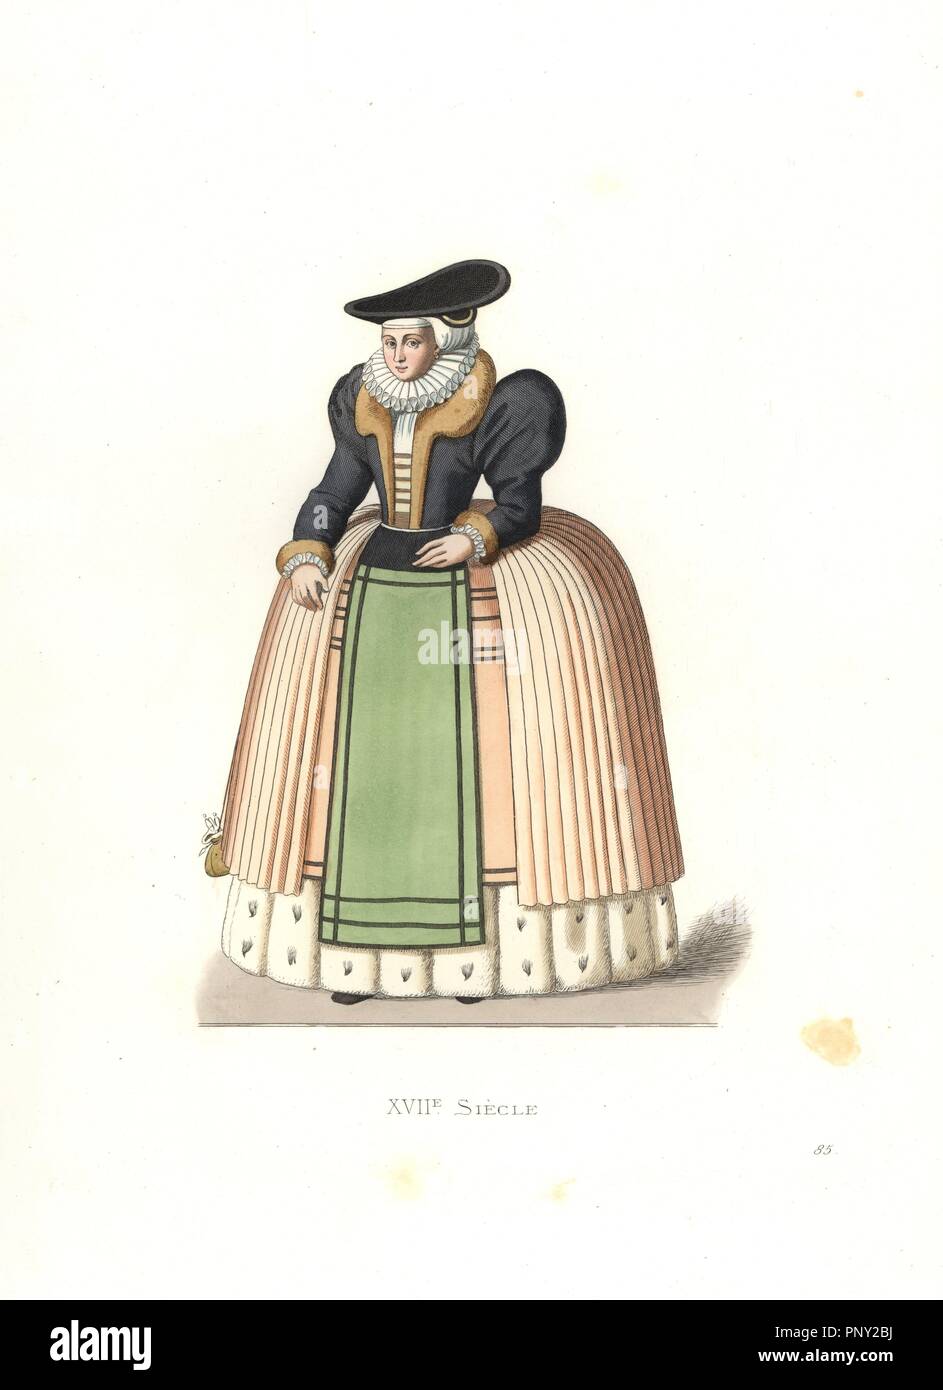 Woman of Alsace, 16th century. Wife of a master ropemaker of Strasbourg. Handcolored illustration by E. Lechevallier-Chevignard, lithographed by A. Didier, L. Flameng, F. Laguillermie, from Georges Duplessis's 'Costumes historiques des XVIe, XVIIe et XVIIIe siecles' (Historical costumes of the 16th, 17th and 18th centuries), Paris 1867. The book was a continuation of the series on the costumes of the 12th to 15th centuries published by Camille Bonnard and Paul Mercuri from 1830. Georges Duplessis (1834-1899) was curator of the Prints department at the Bibliotheque nationale. Edmond Lechevallie Stock Photo